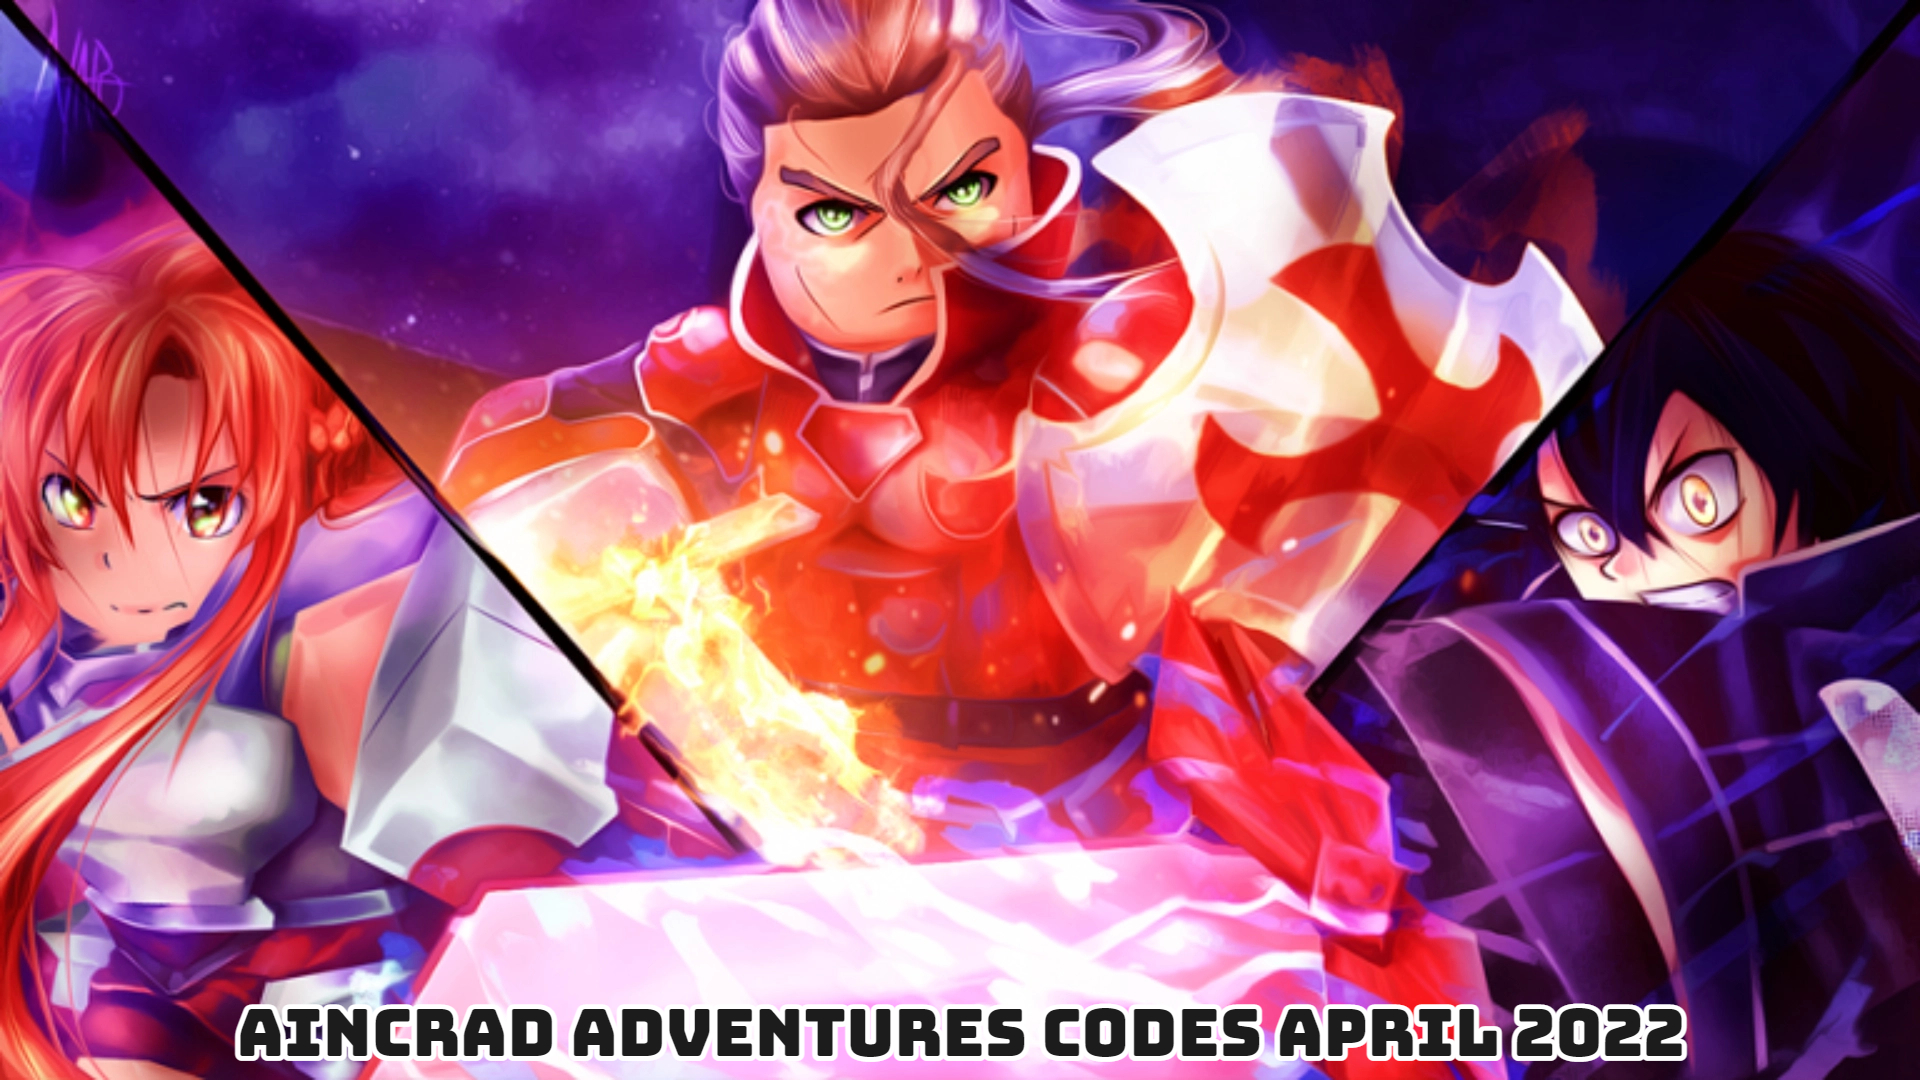 You are currently viewing Aincrad Adventures Codes Today 14 April 2022